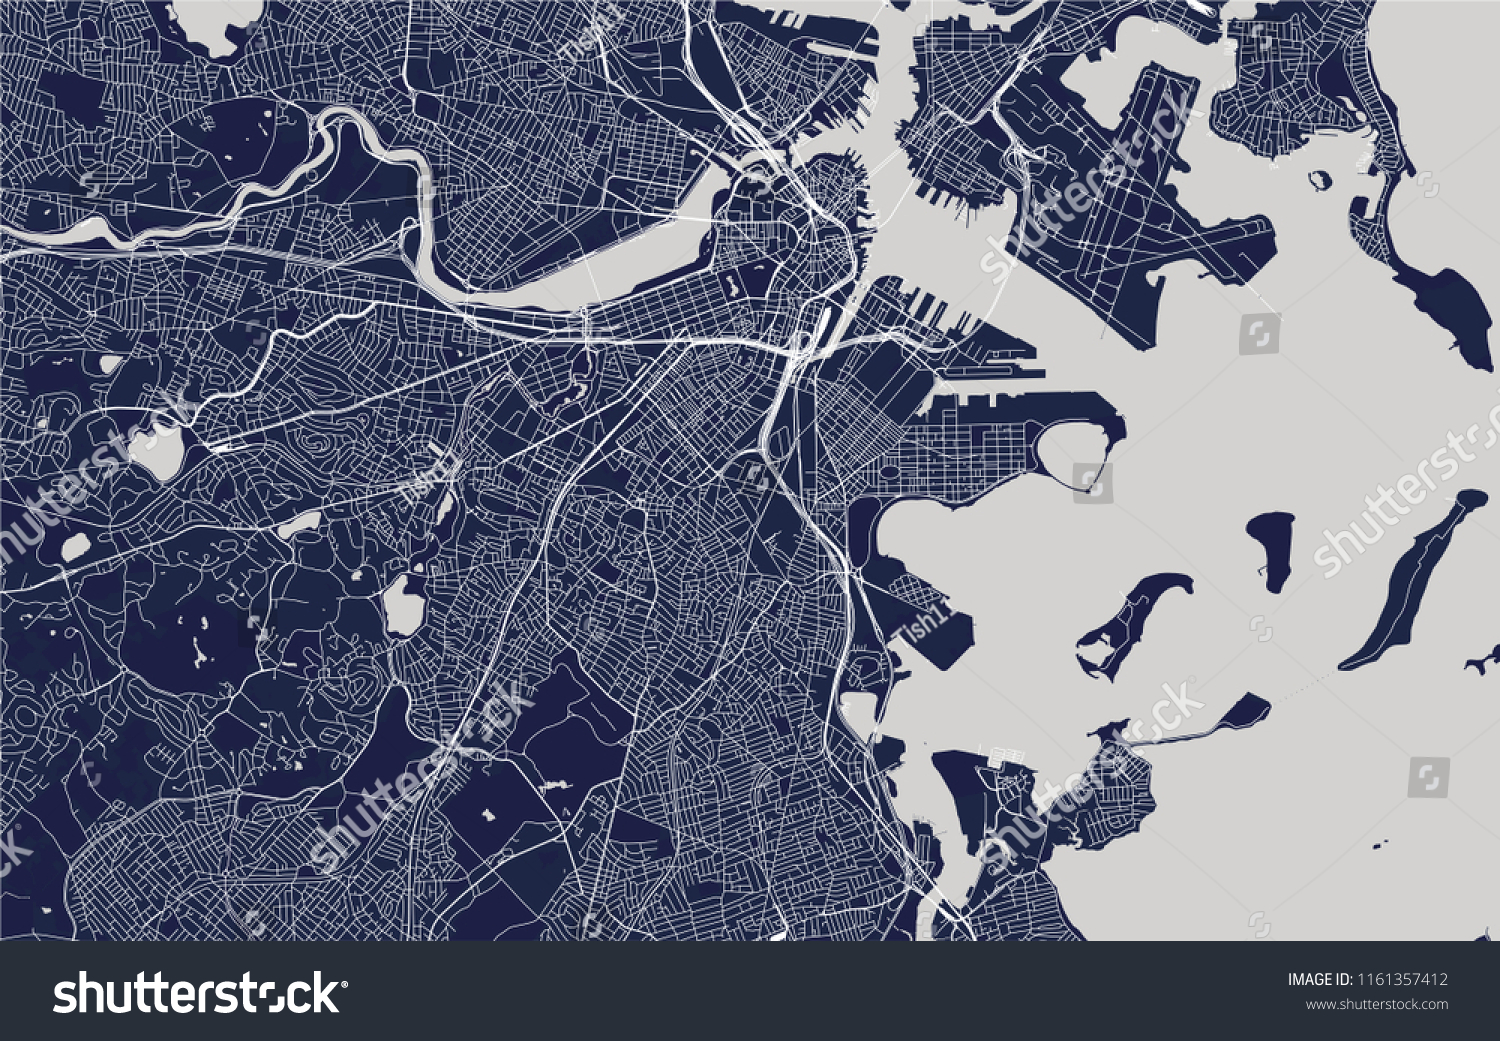 SVG of vector map of the city of Boston, USA svg